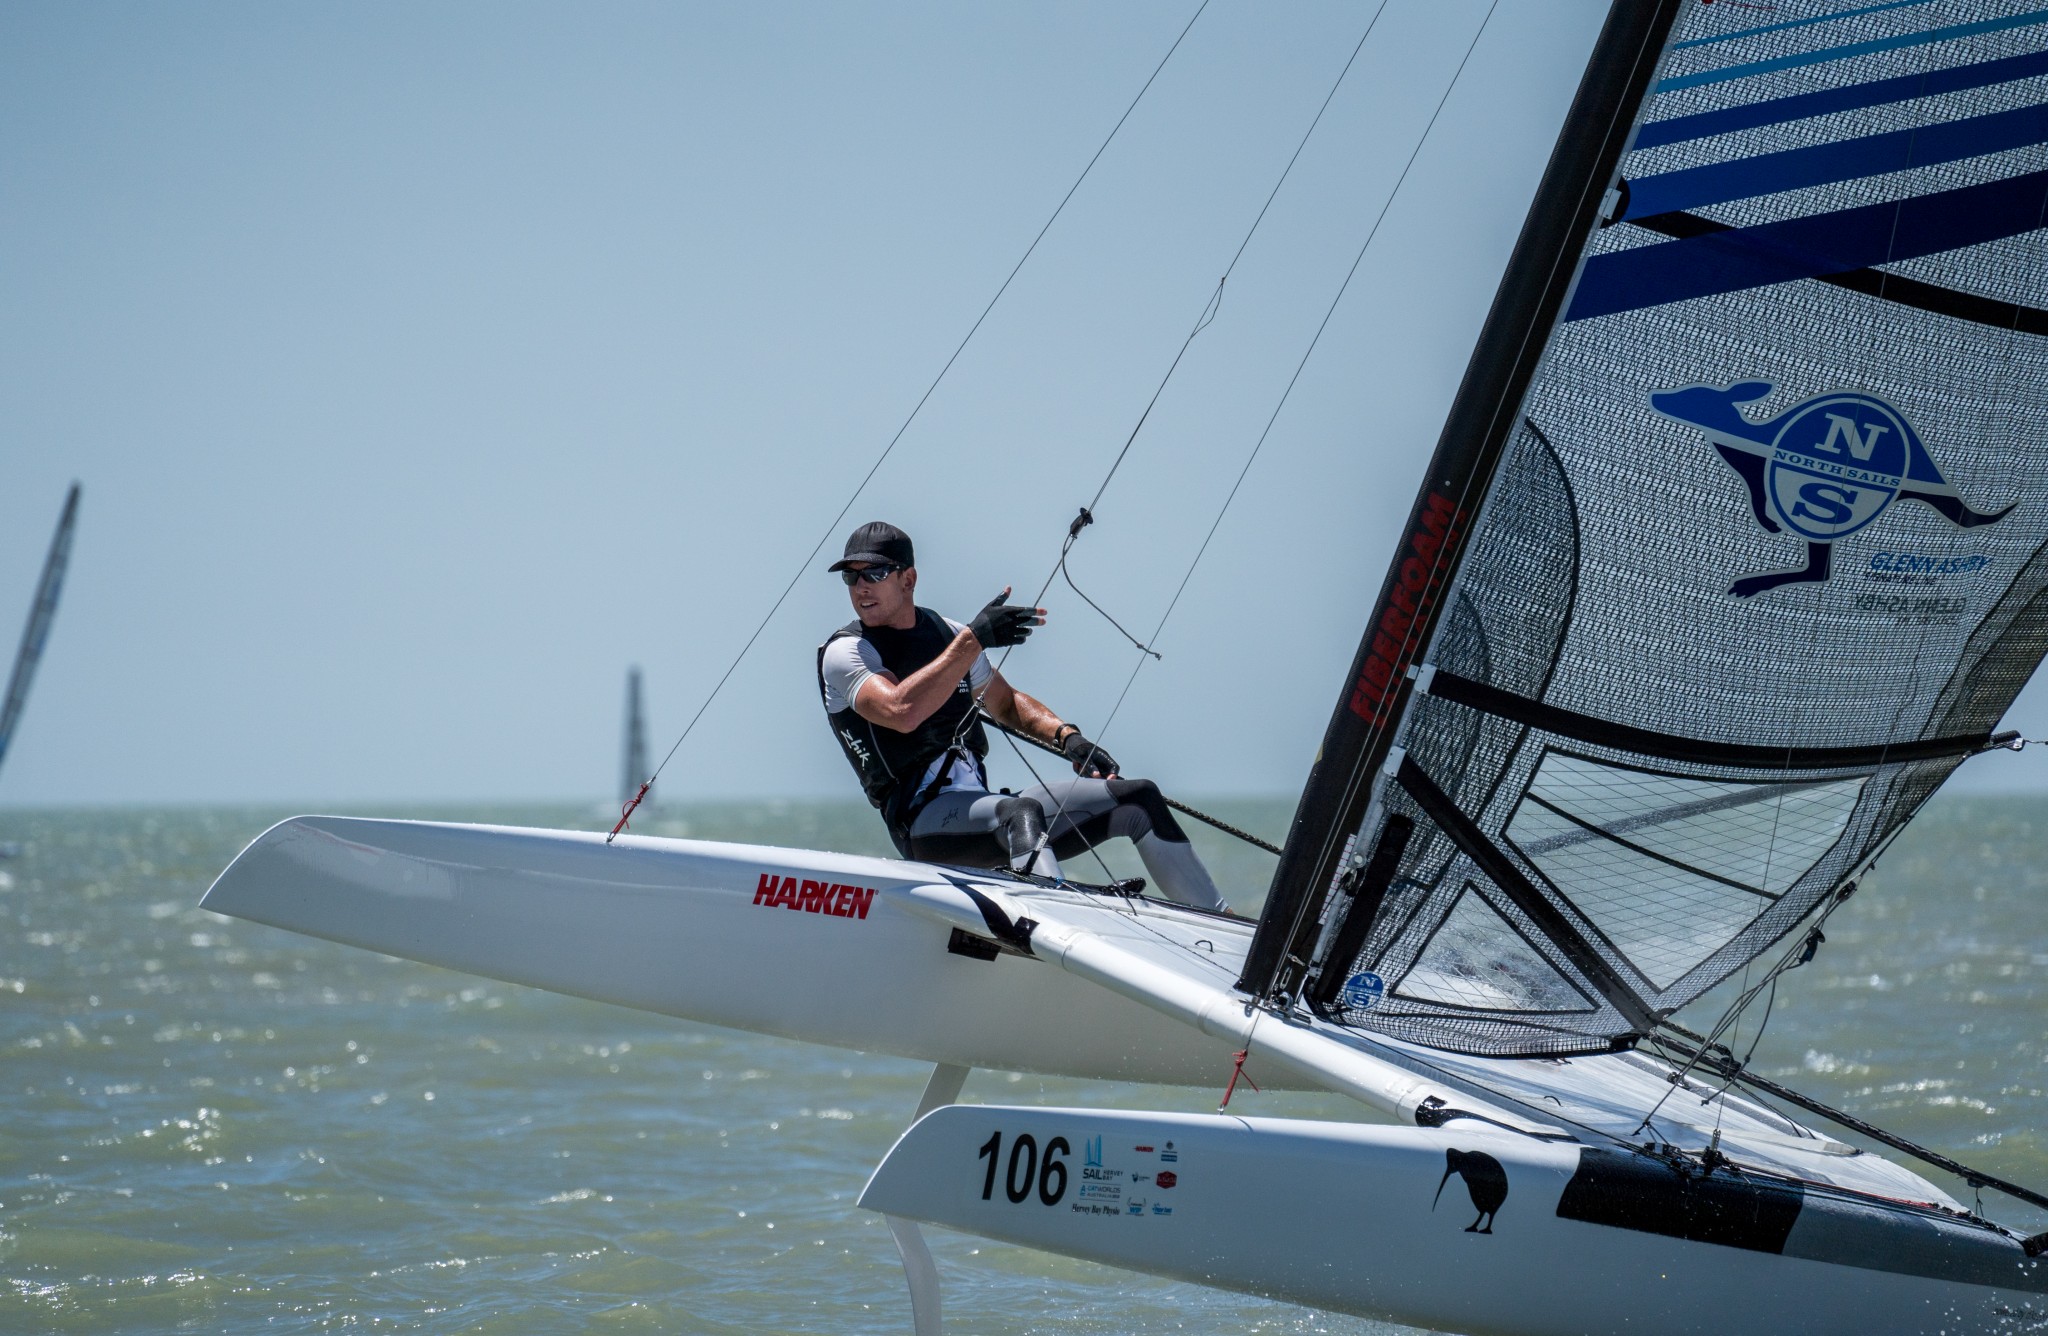 ashby-aces-a-class-catamaran-world-champs-for-the-10th-time